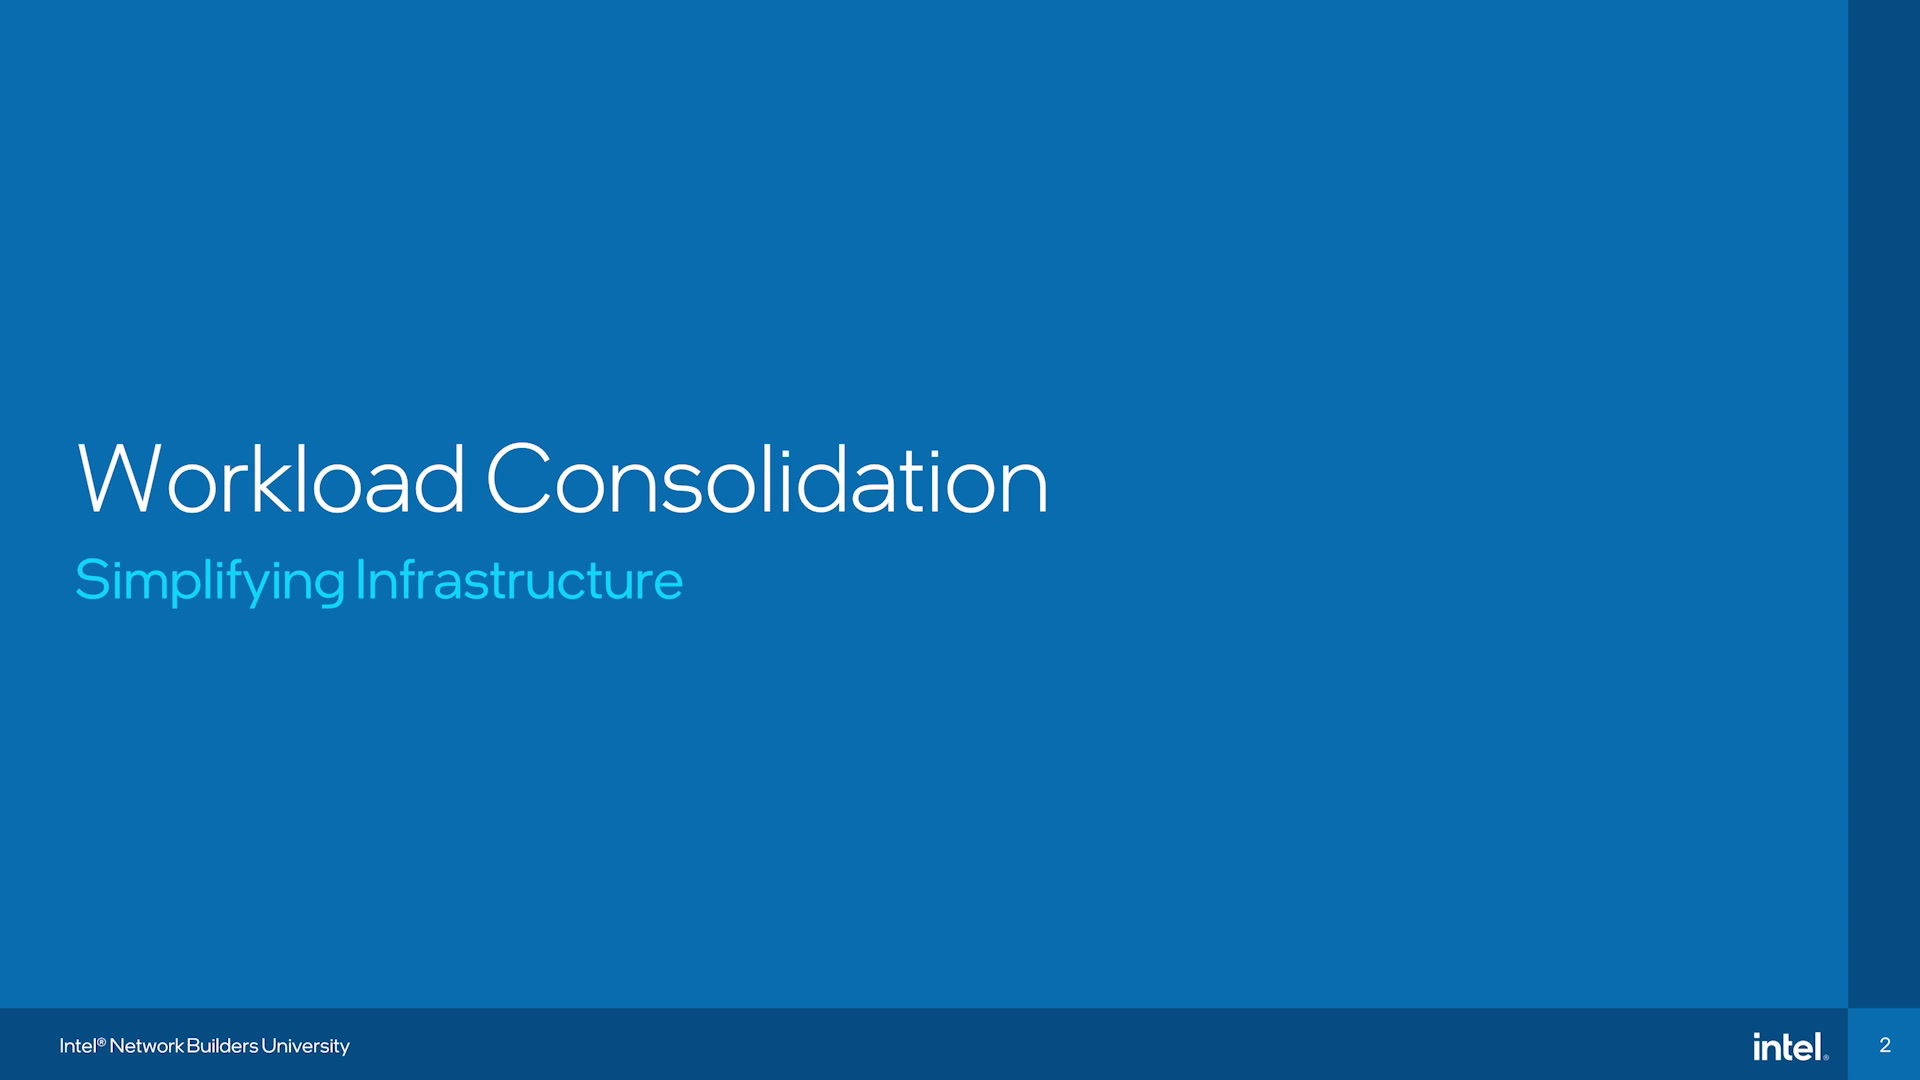 Chapter 1 : Workload Consolidation and Intelligence at the Edge